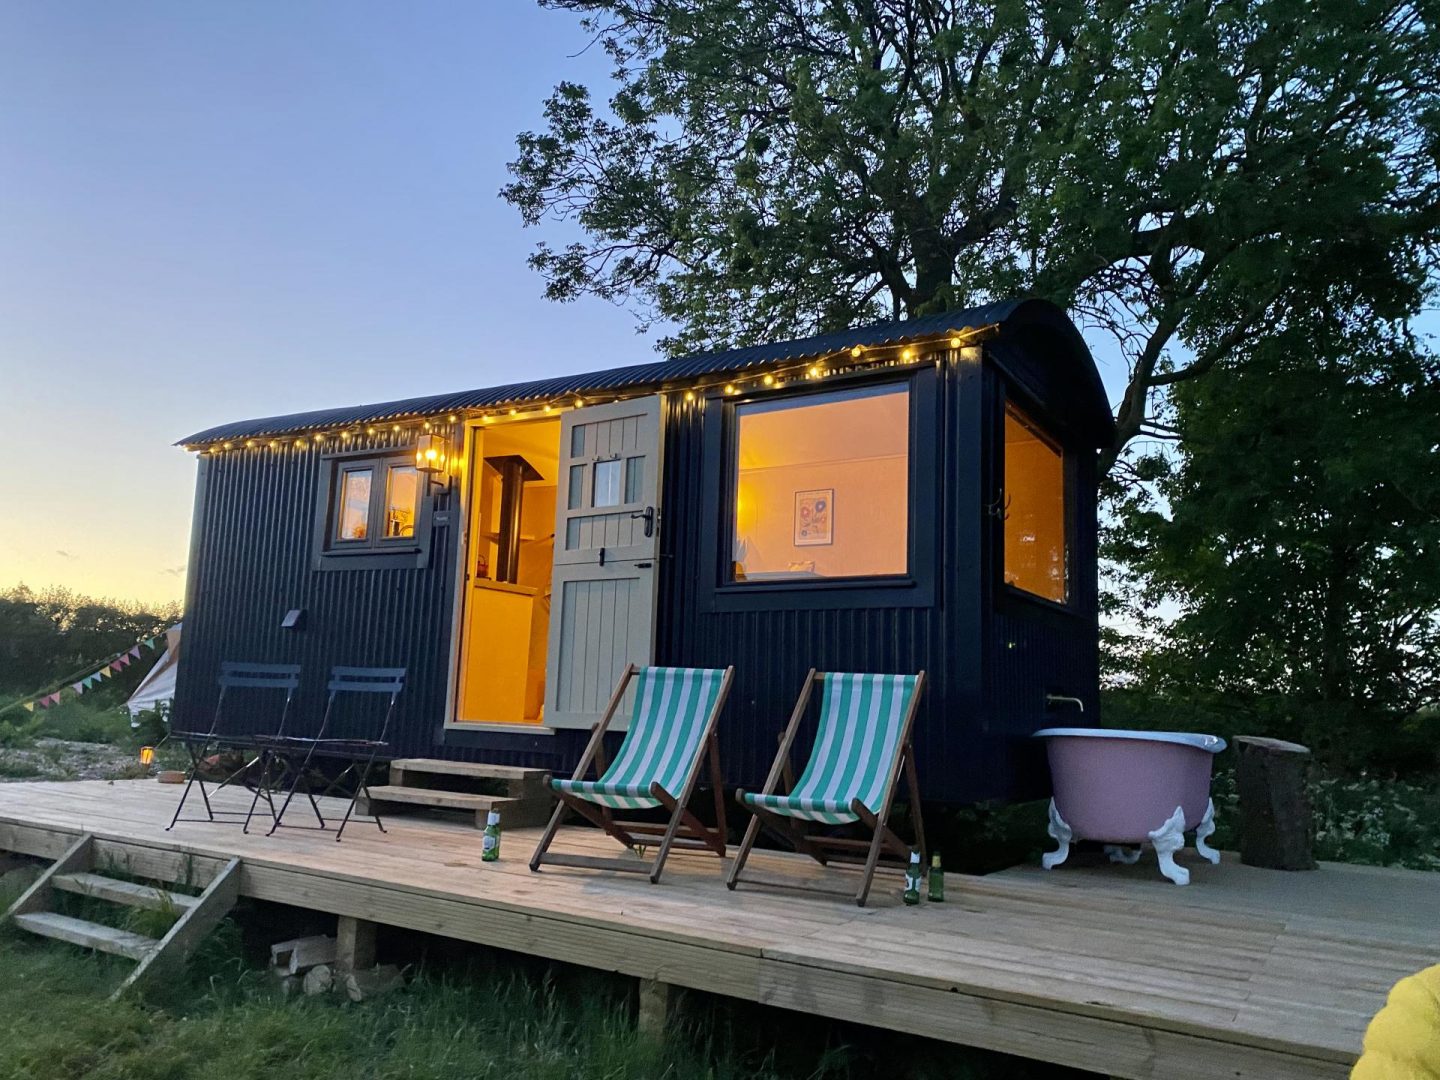 Places to stay: Fat Pheasant Shepherd Huts